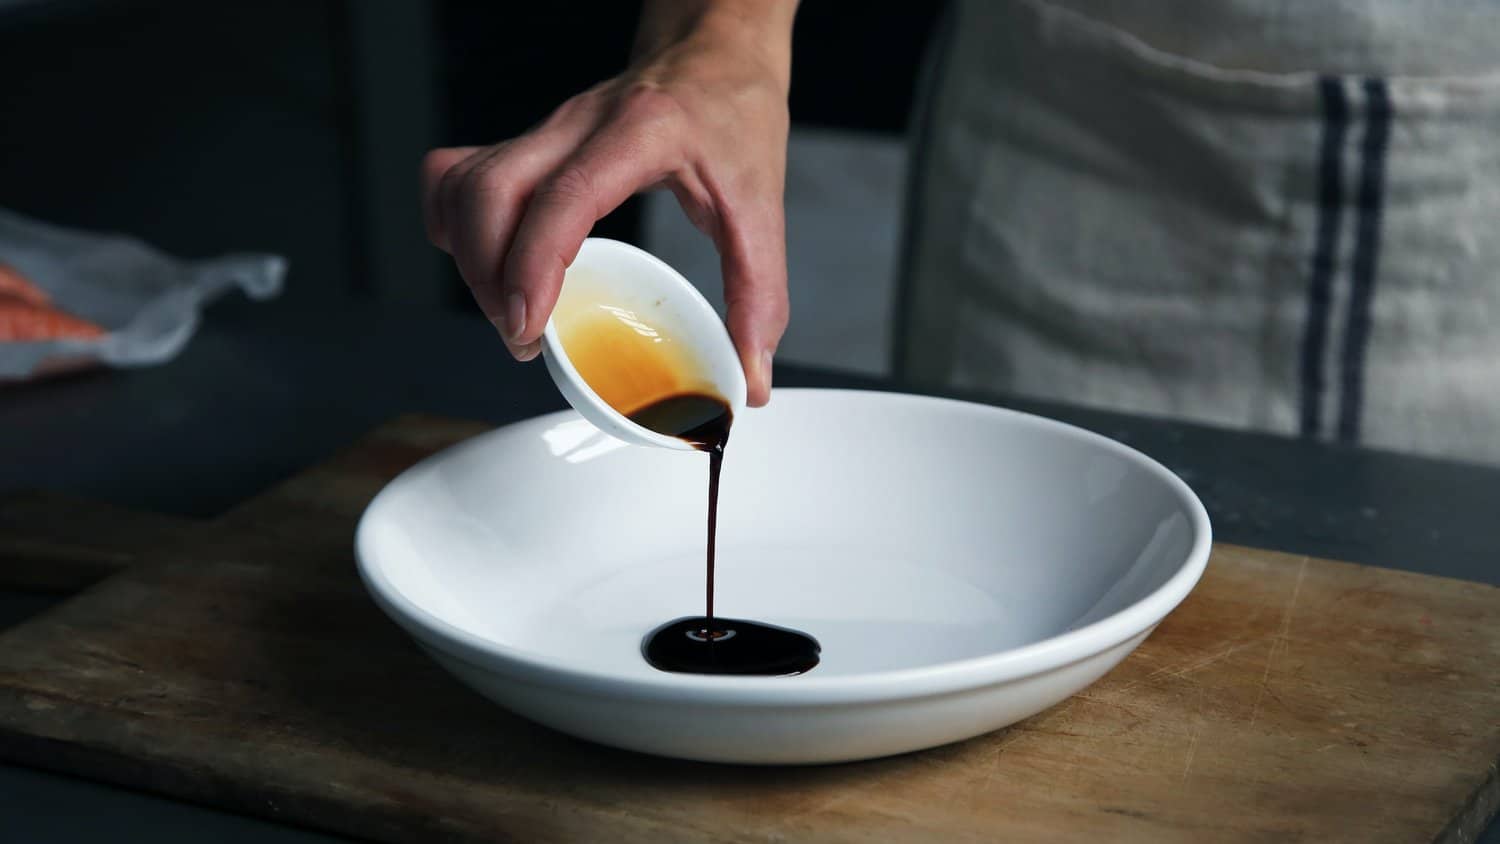 Soy sauce being poured into a white bowl